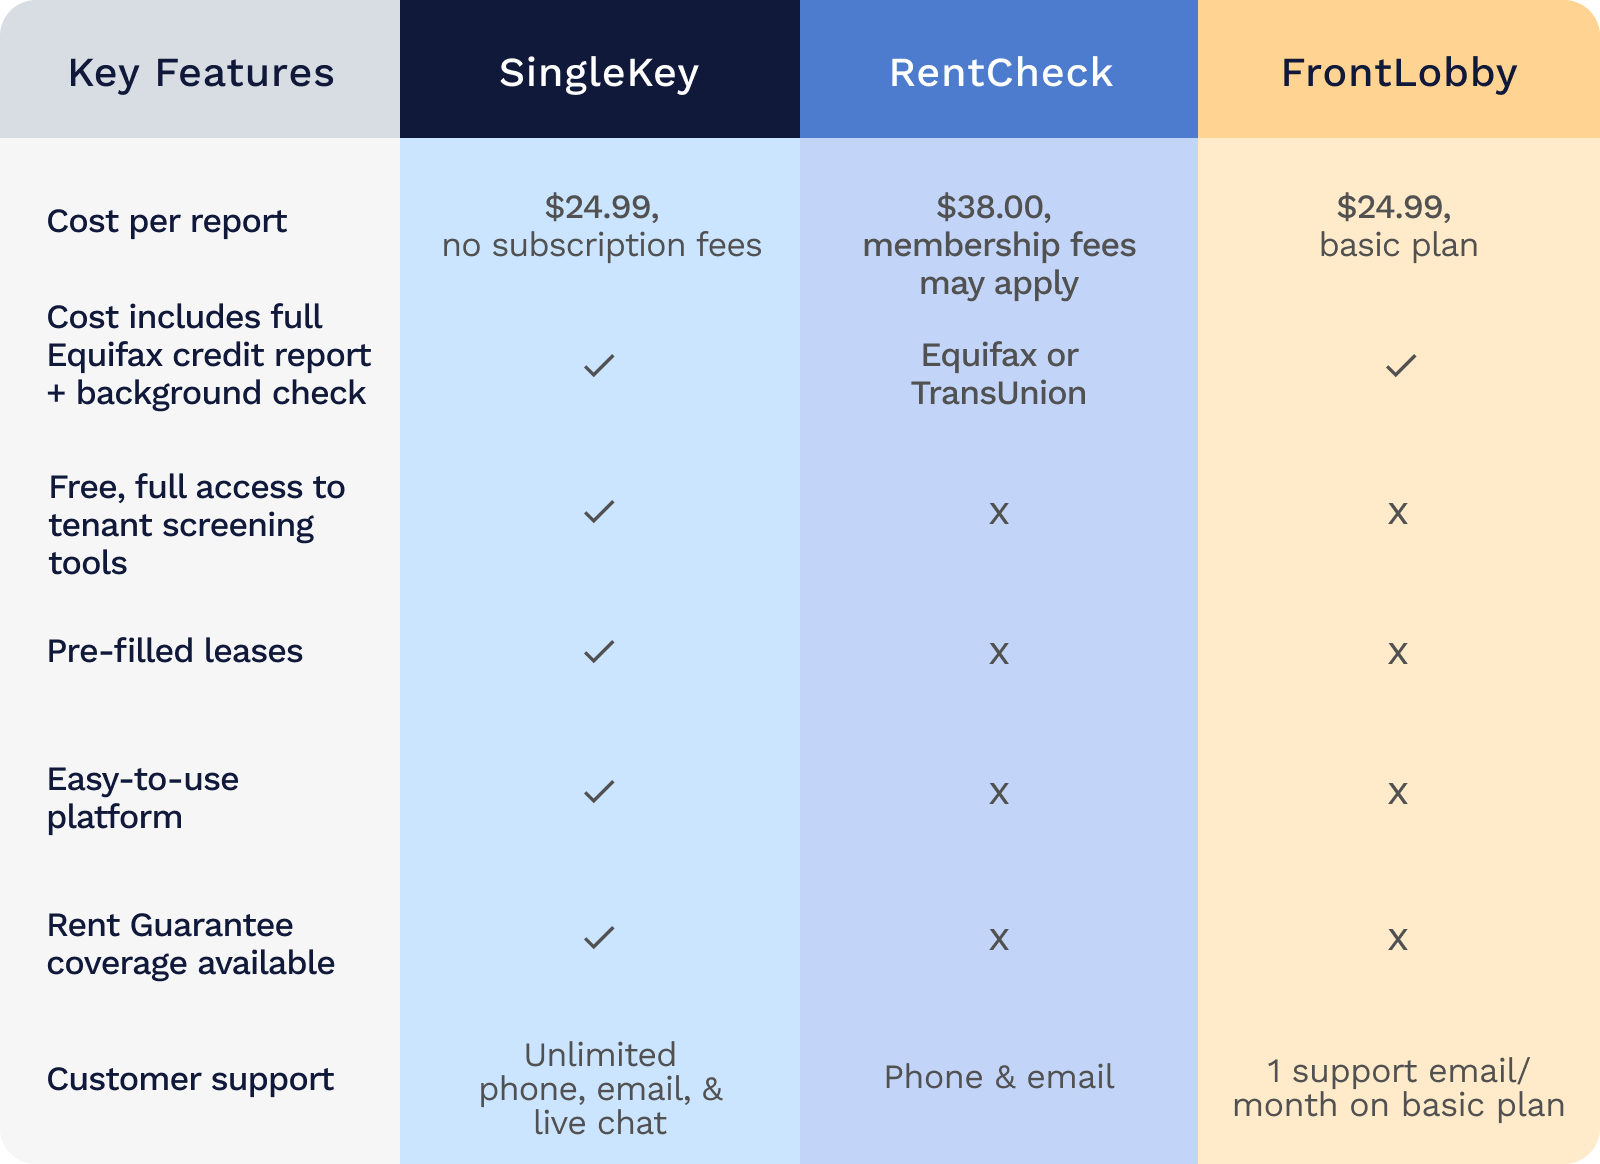 Comparison chart of the top three tenant screening services in Canada, SingleKey, RentCheck, and FrontLobby.